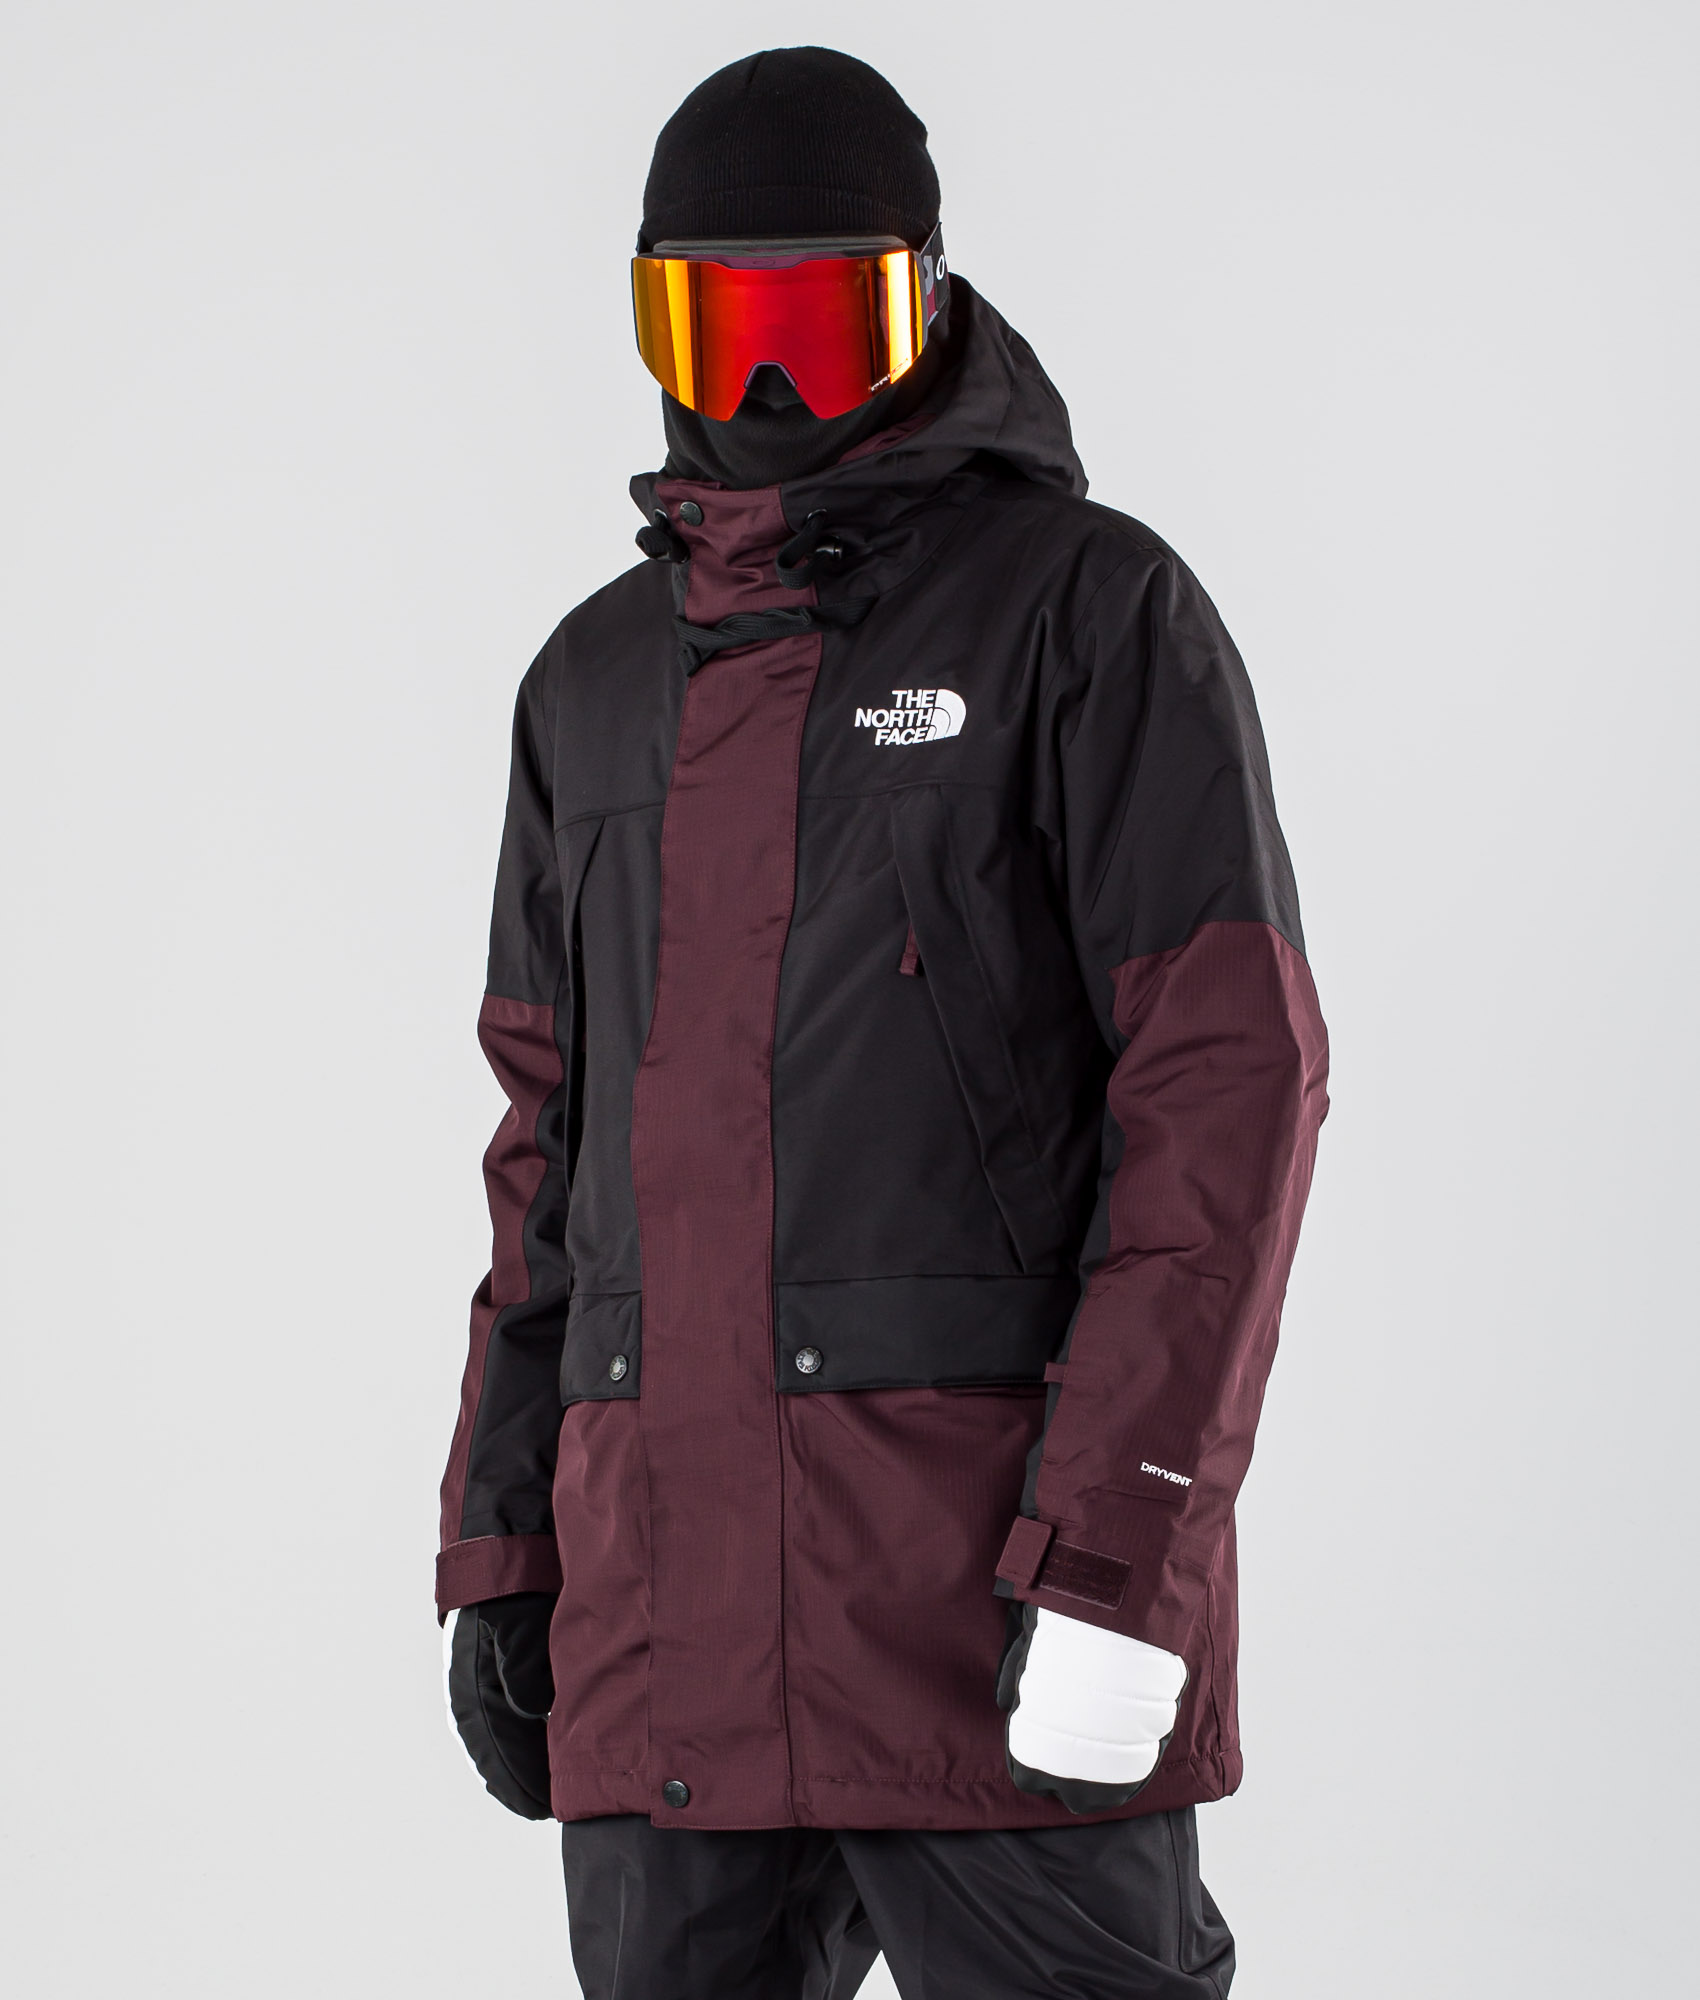 the north face jacket snowboard